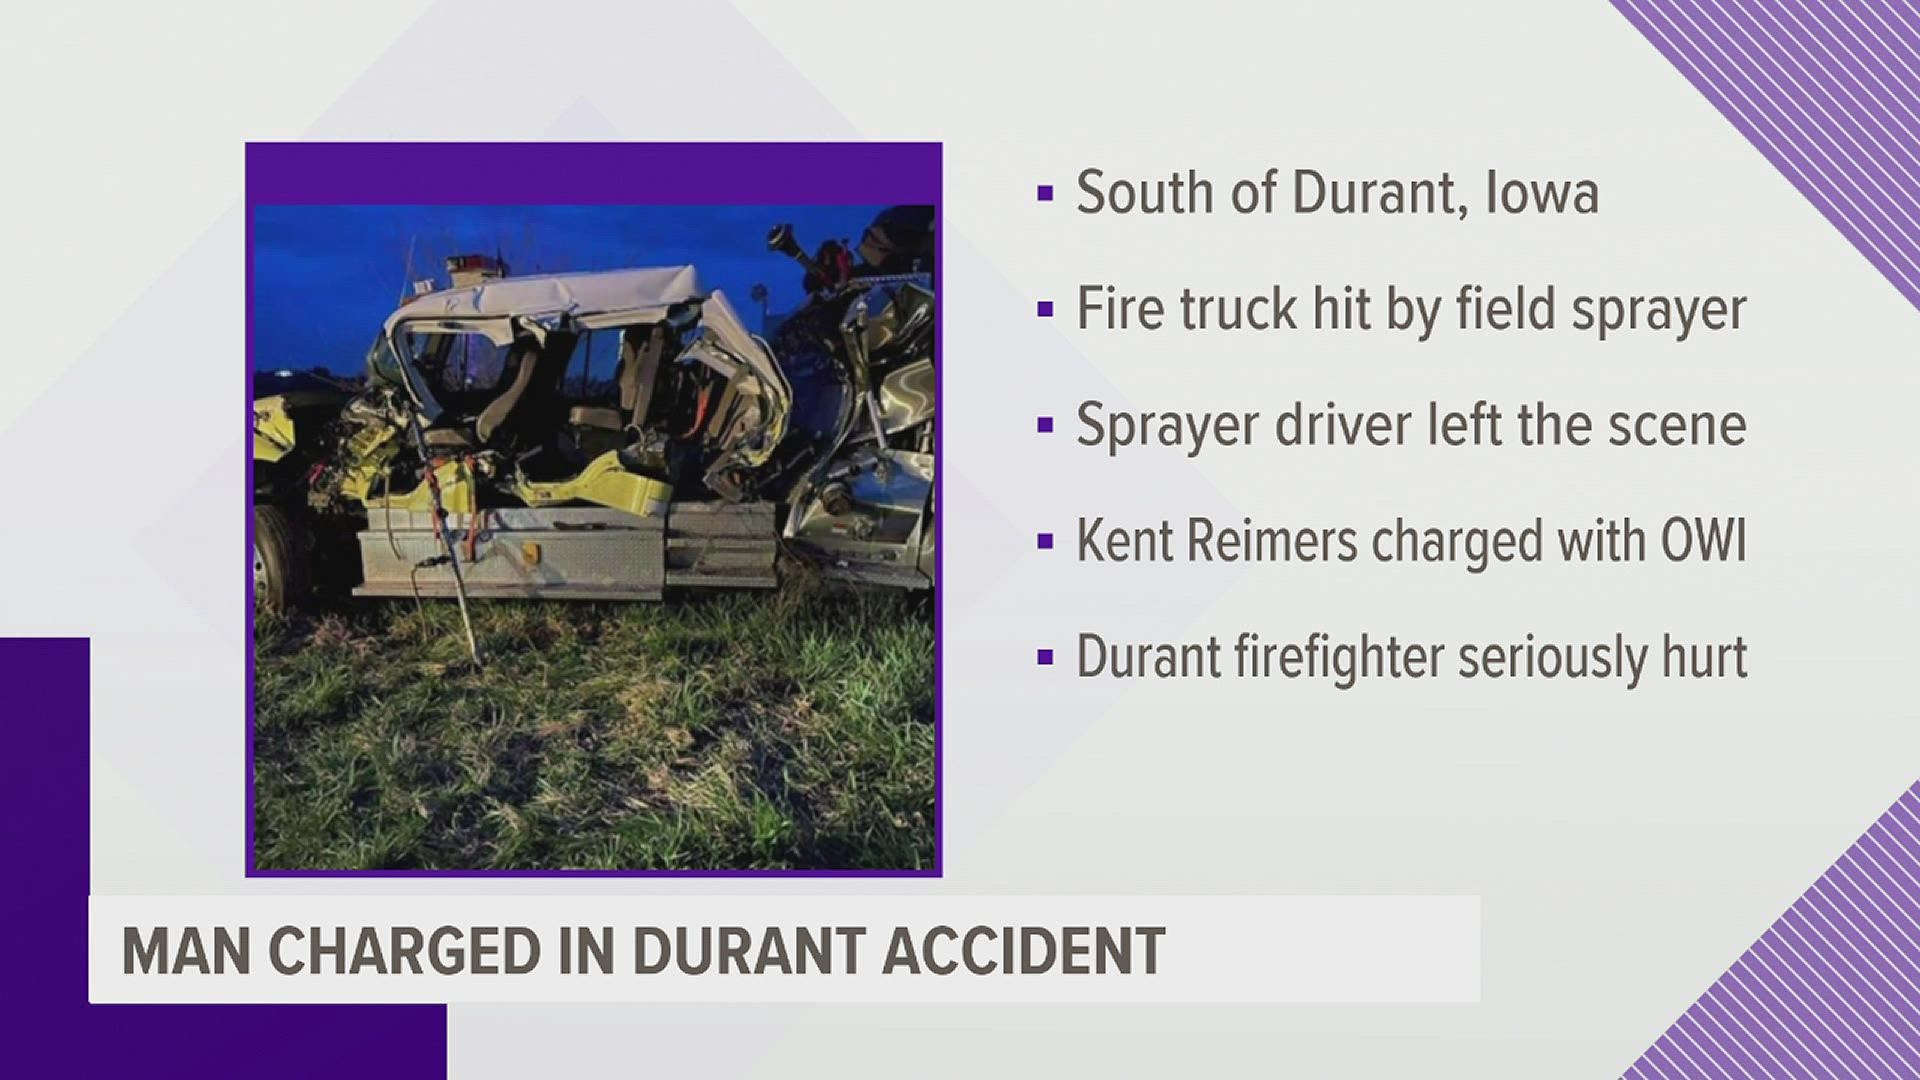 A commercial farm sprayer caused a collision that hurt several firefighters, including one hospitalized with severe injuries.